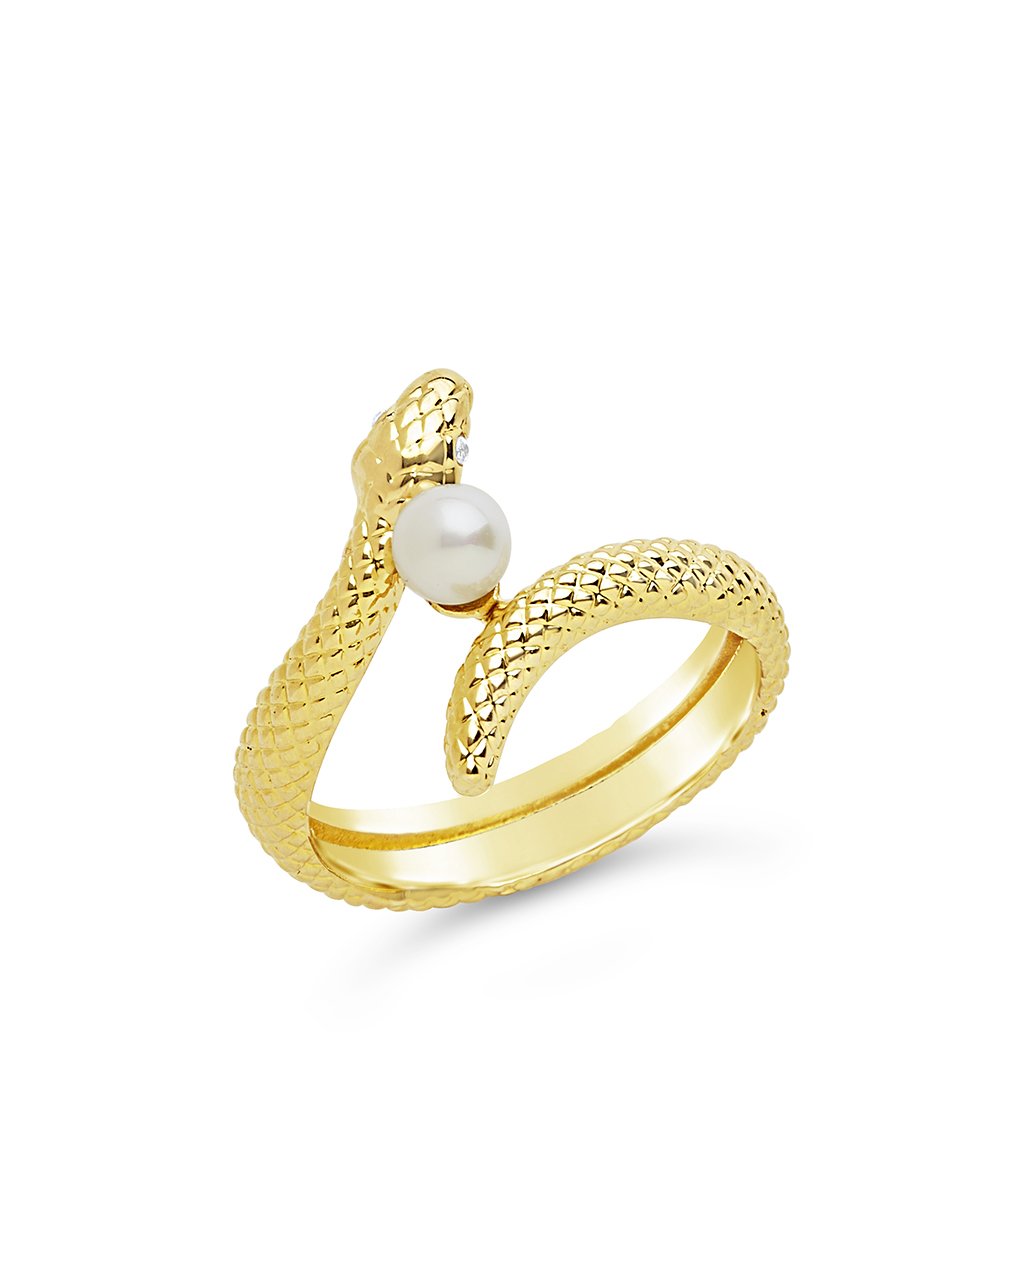 Entwined Serpent & Pearl Ring - Sterling Forever